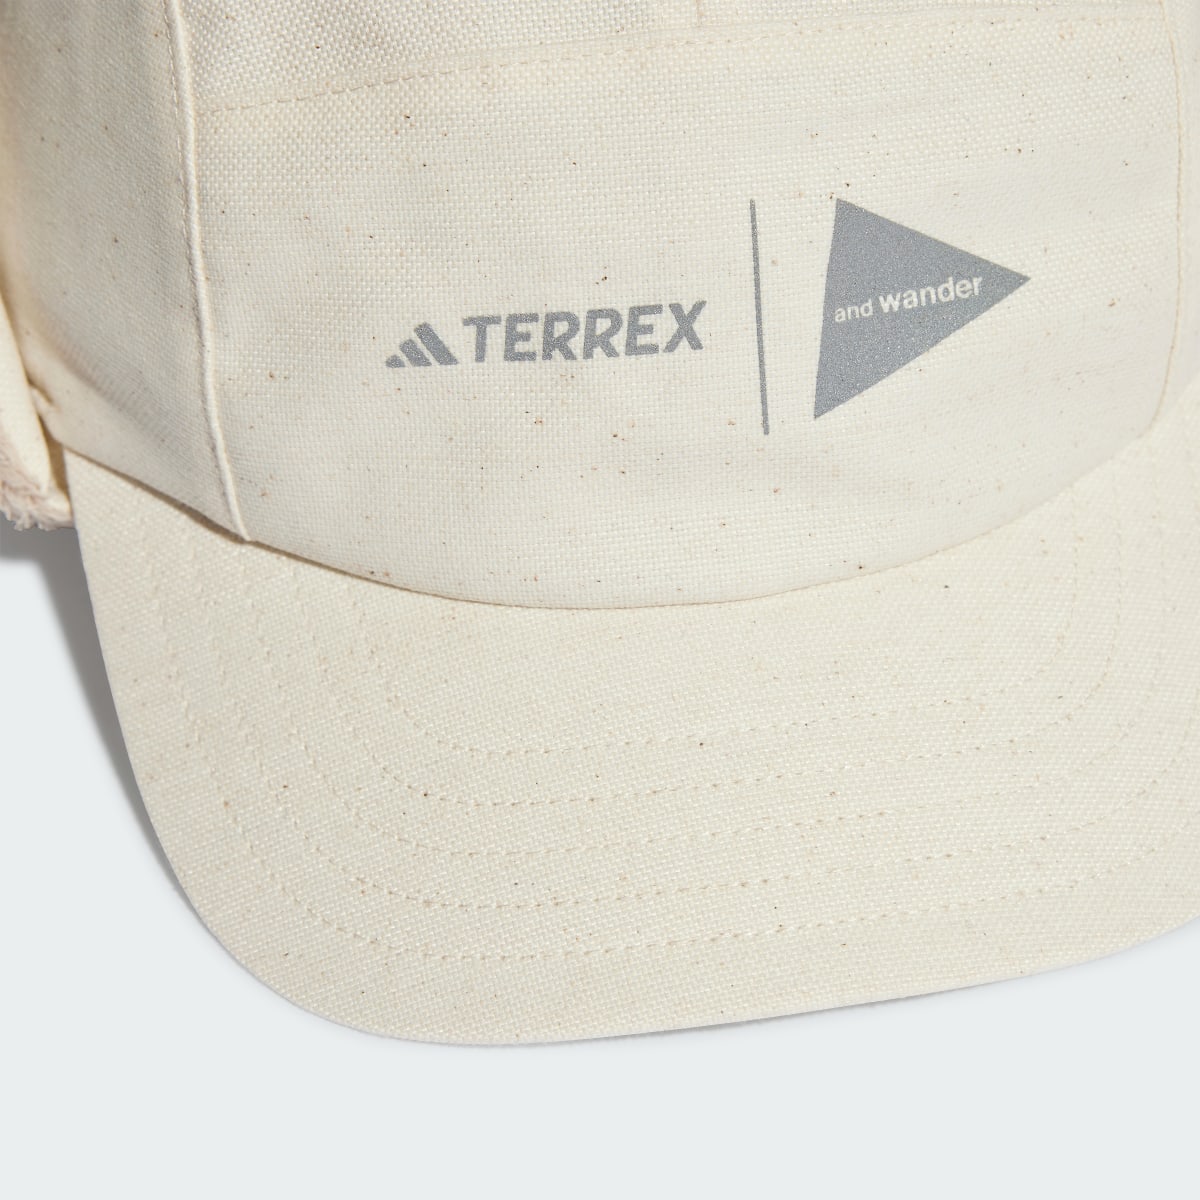 Adidas Terrex + and wander COLD.RDY 5-Panel Ear Cap - HY4290